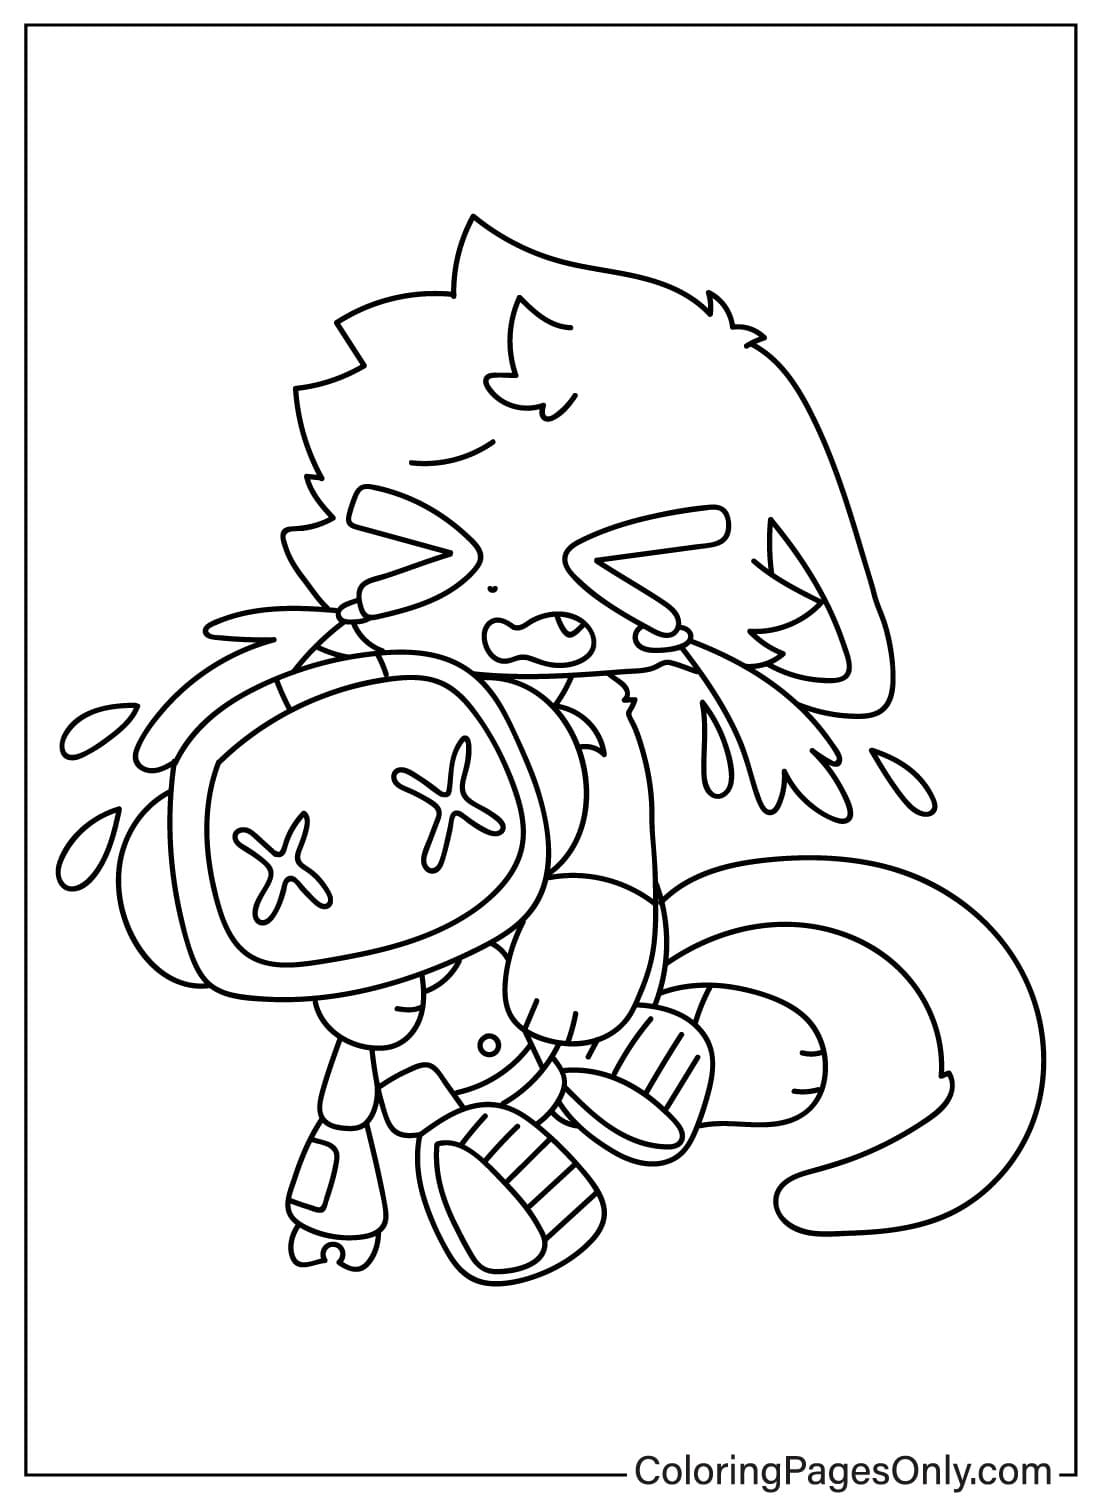 CatNap Coloring Page JPG from CatNap